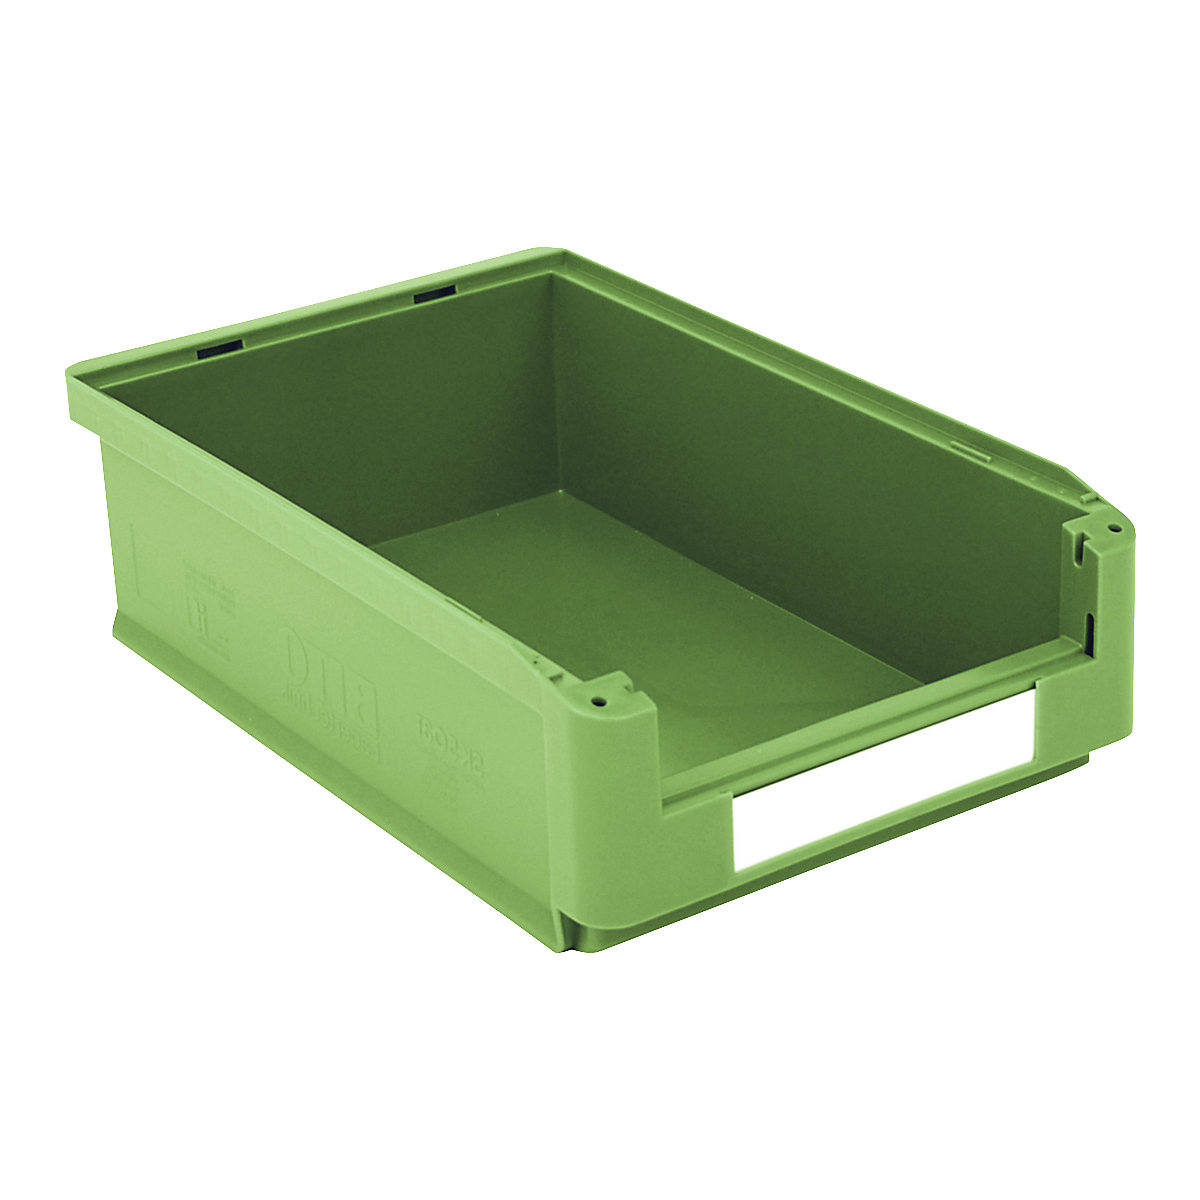 Open fronted storage bin – BITO, LxWxH 500 x 313 x 145 mm, pack of 8, green-4